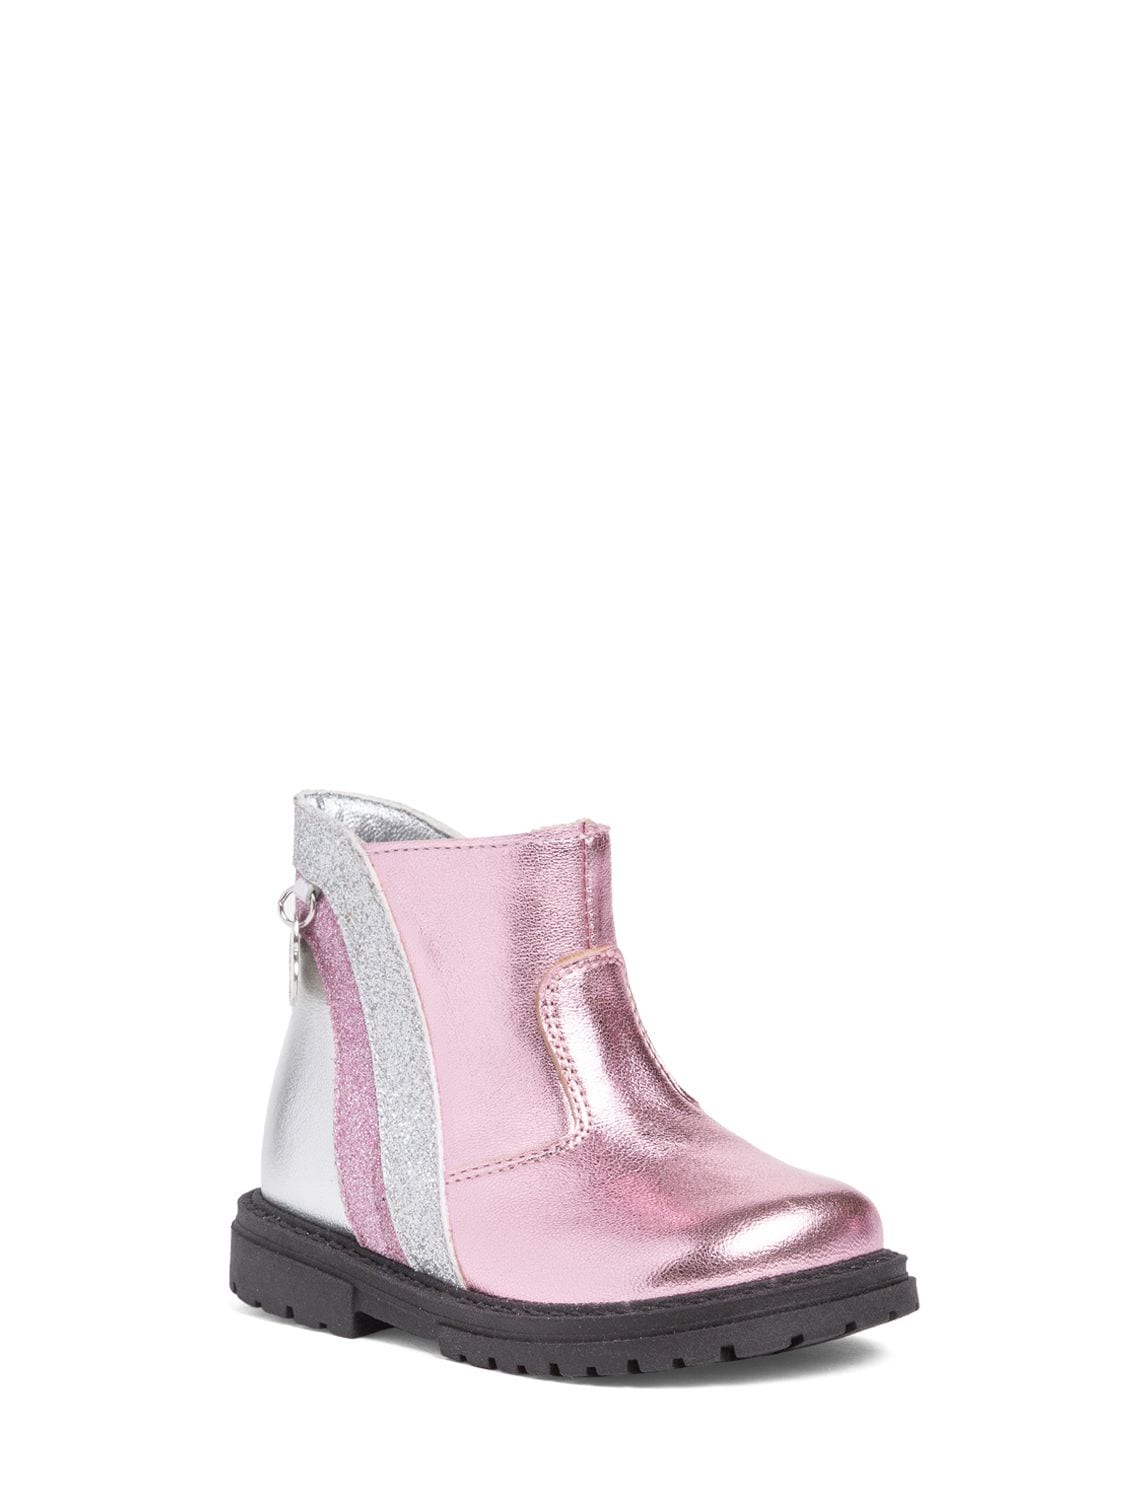 Shop Monnalisa Laminated Leather Boots In Pink